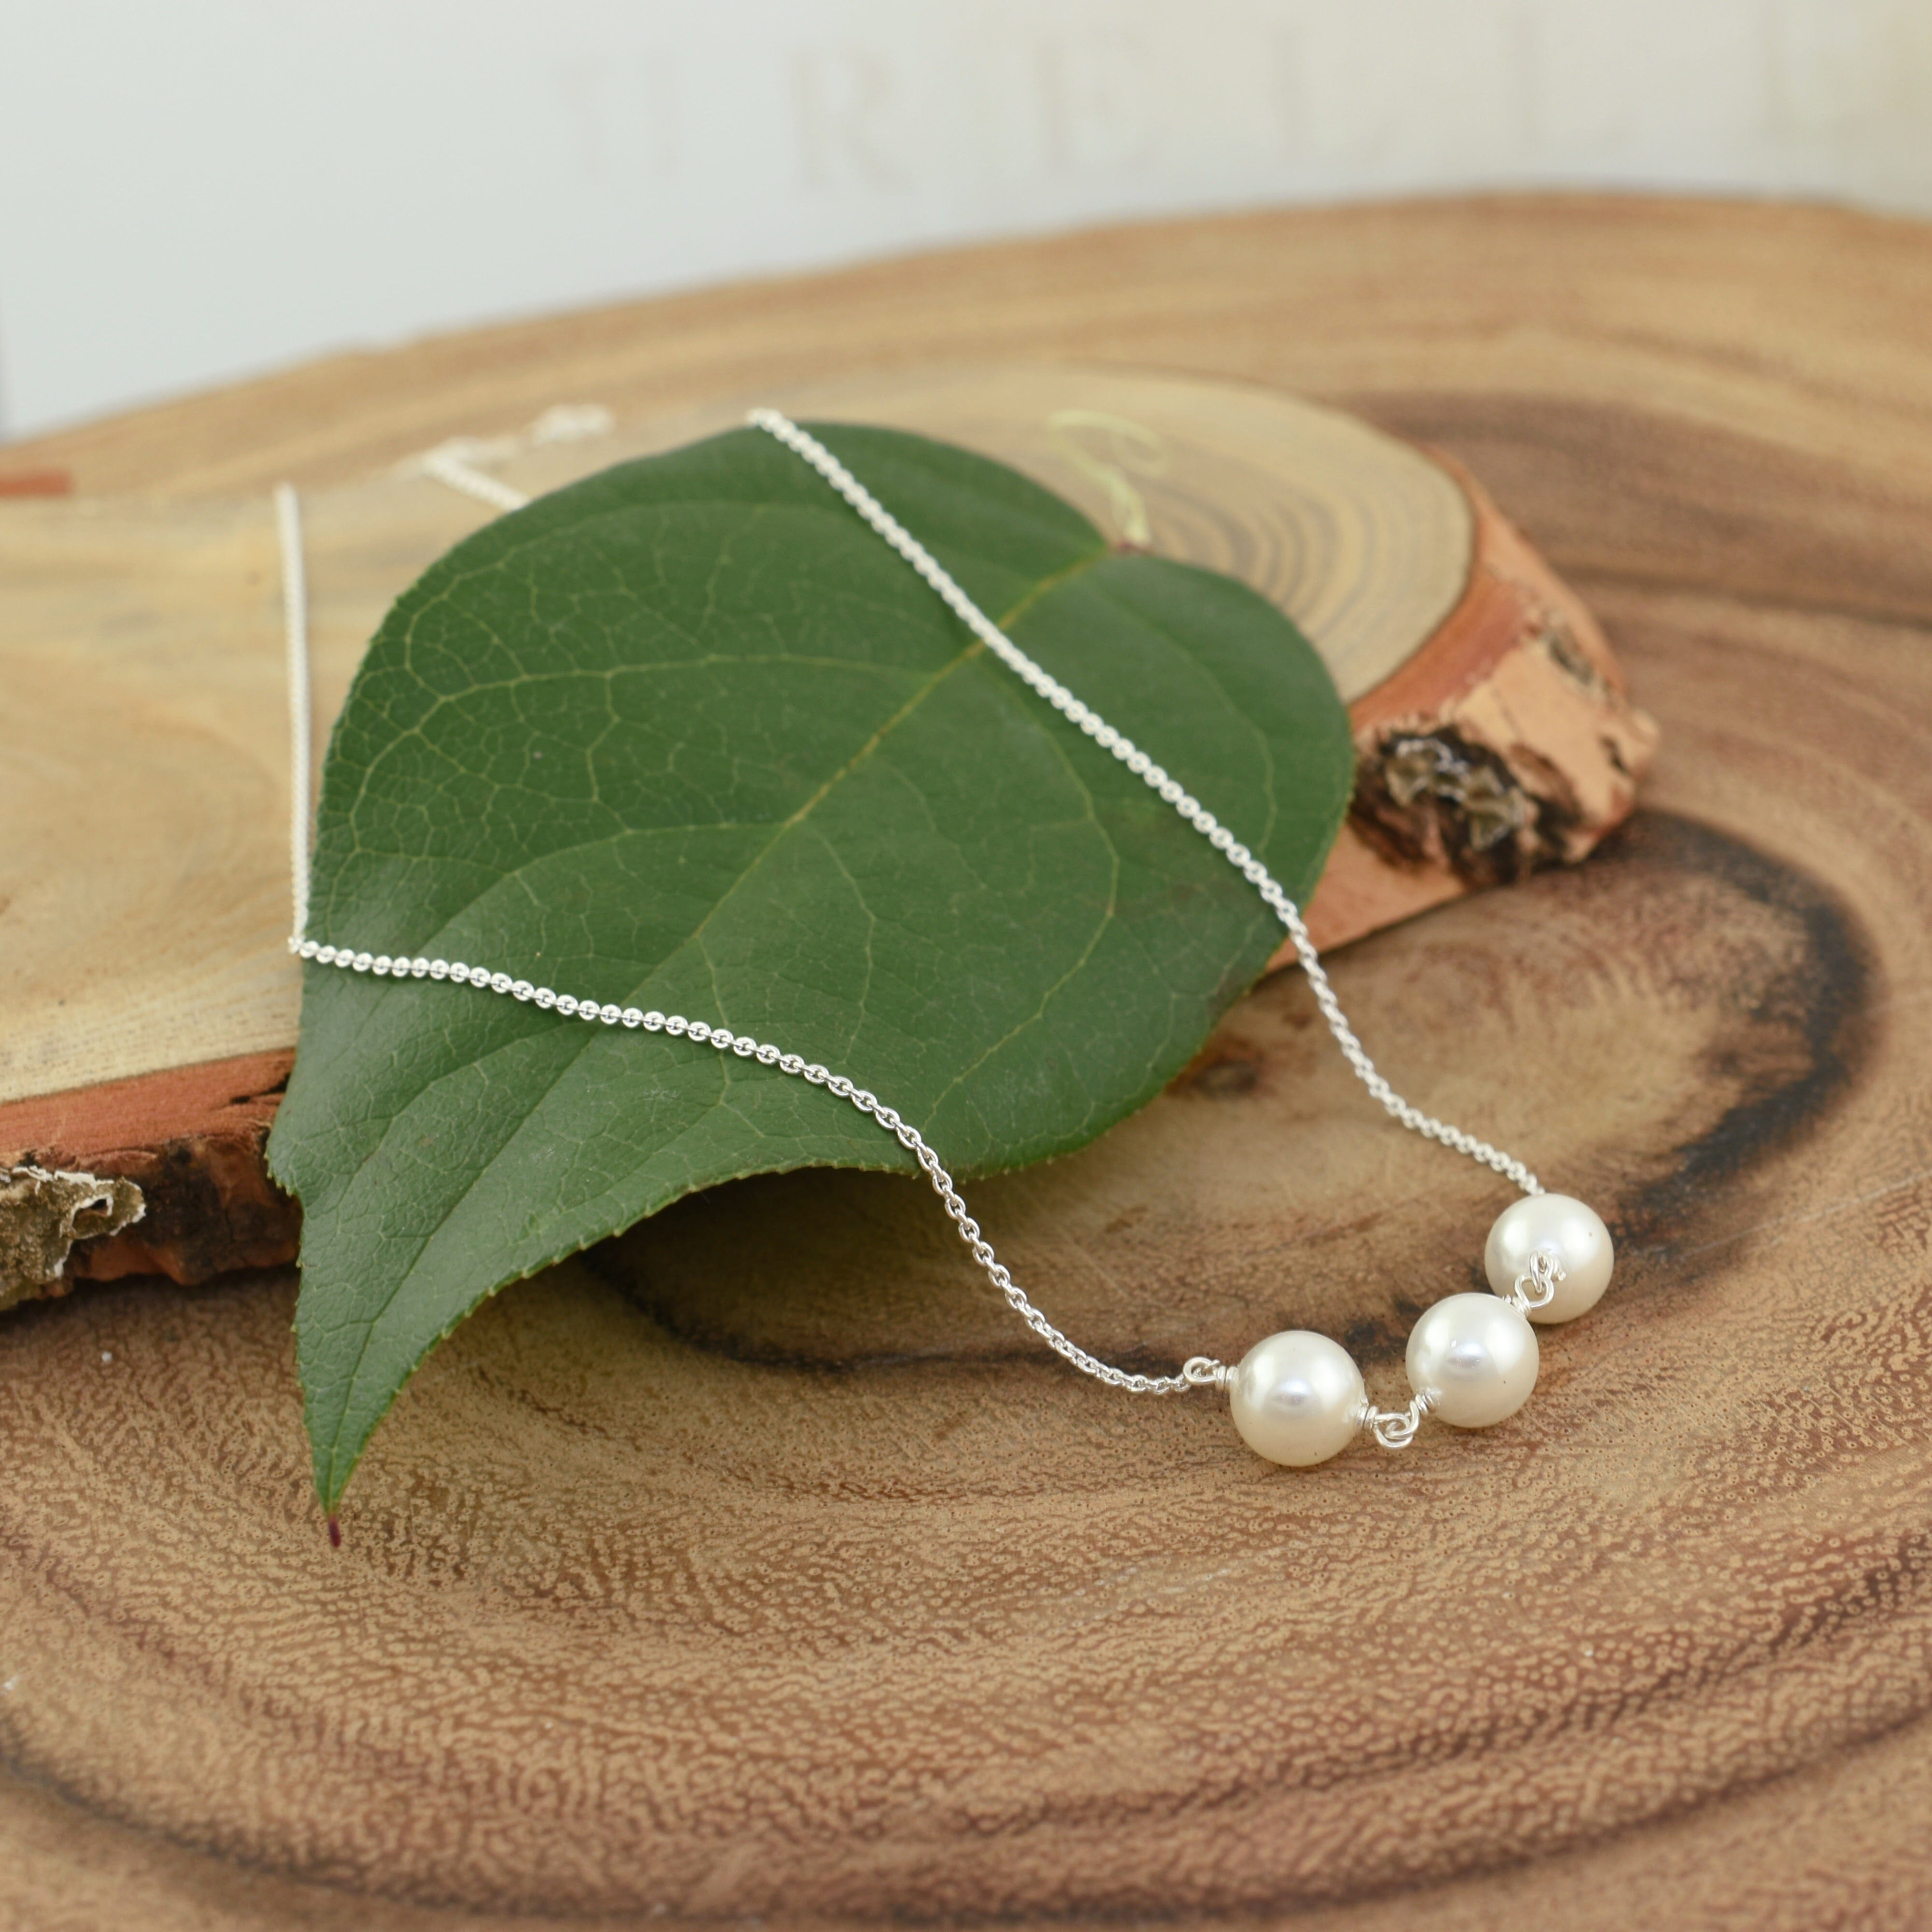 sterling silver minimalist style necklace with three freshwater pearls